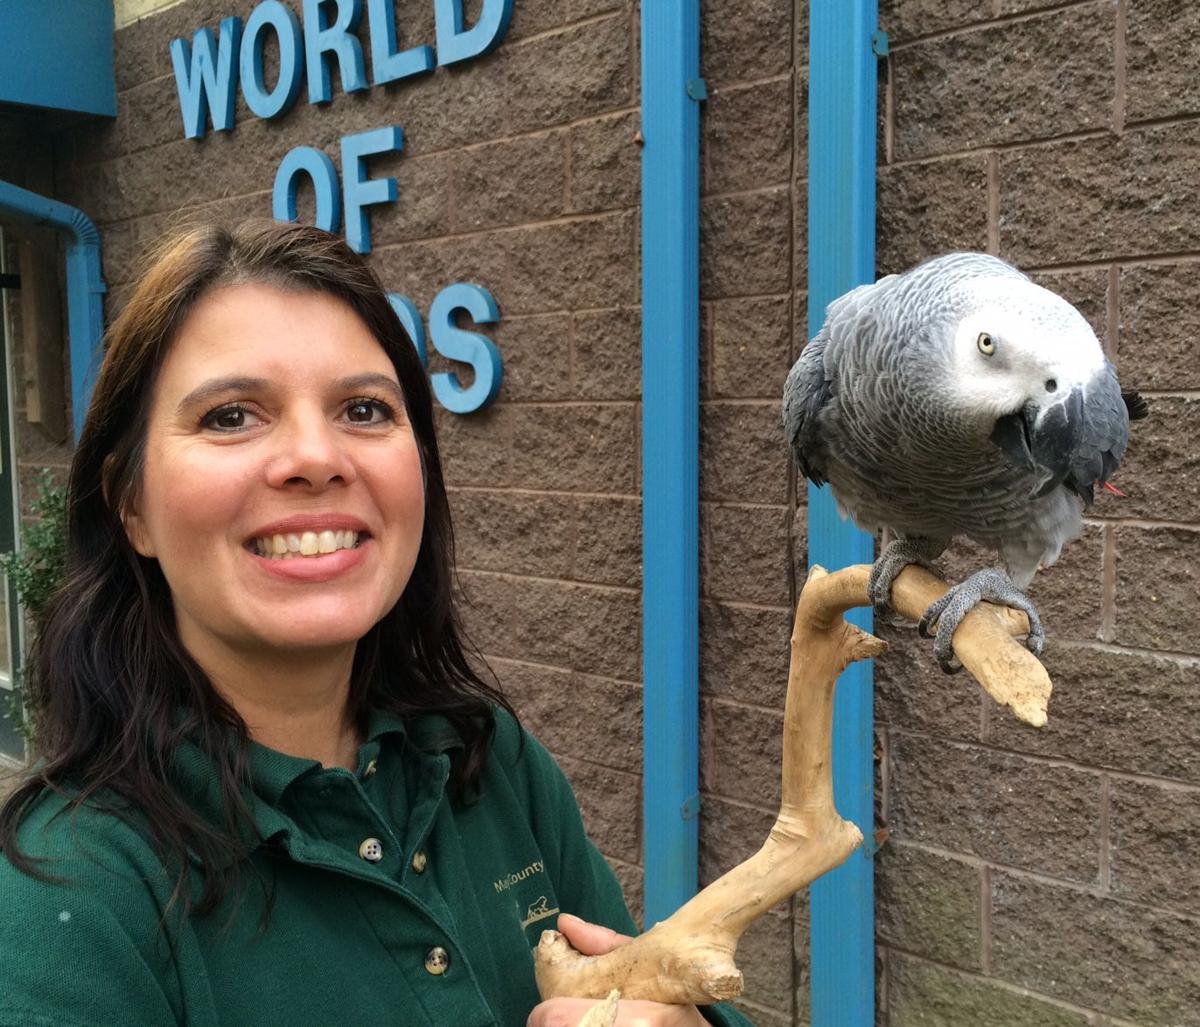 Stolen zoo parrot found. But the big mystery remains-who took him ...